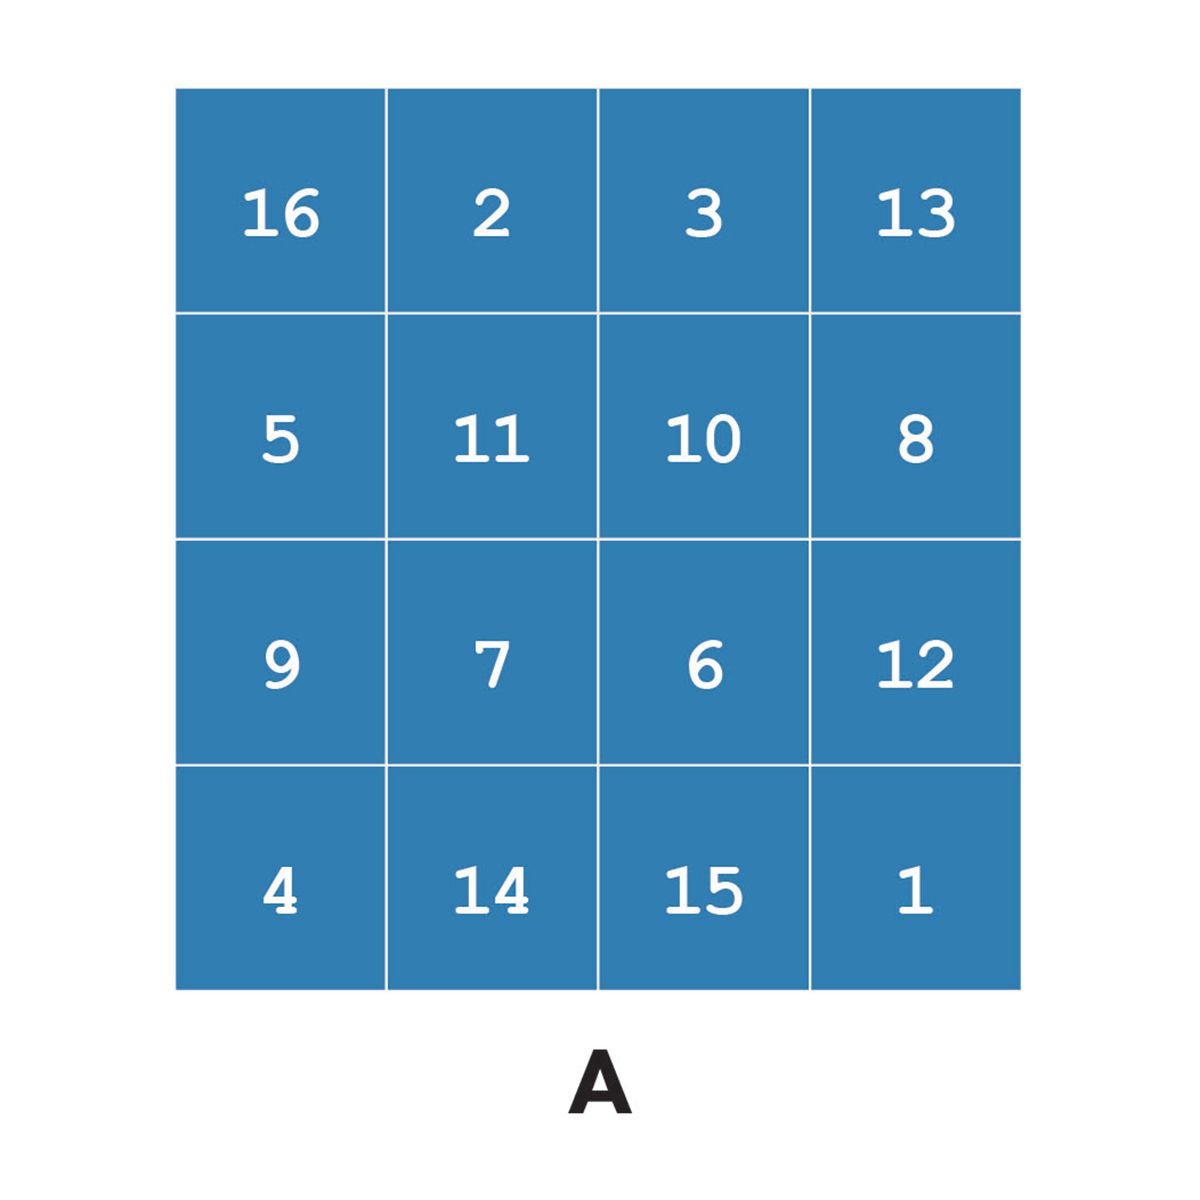 A 4x4 matrix of numbers, labeled as A.